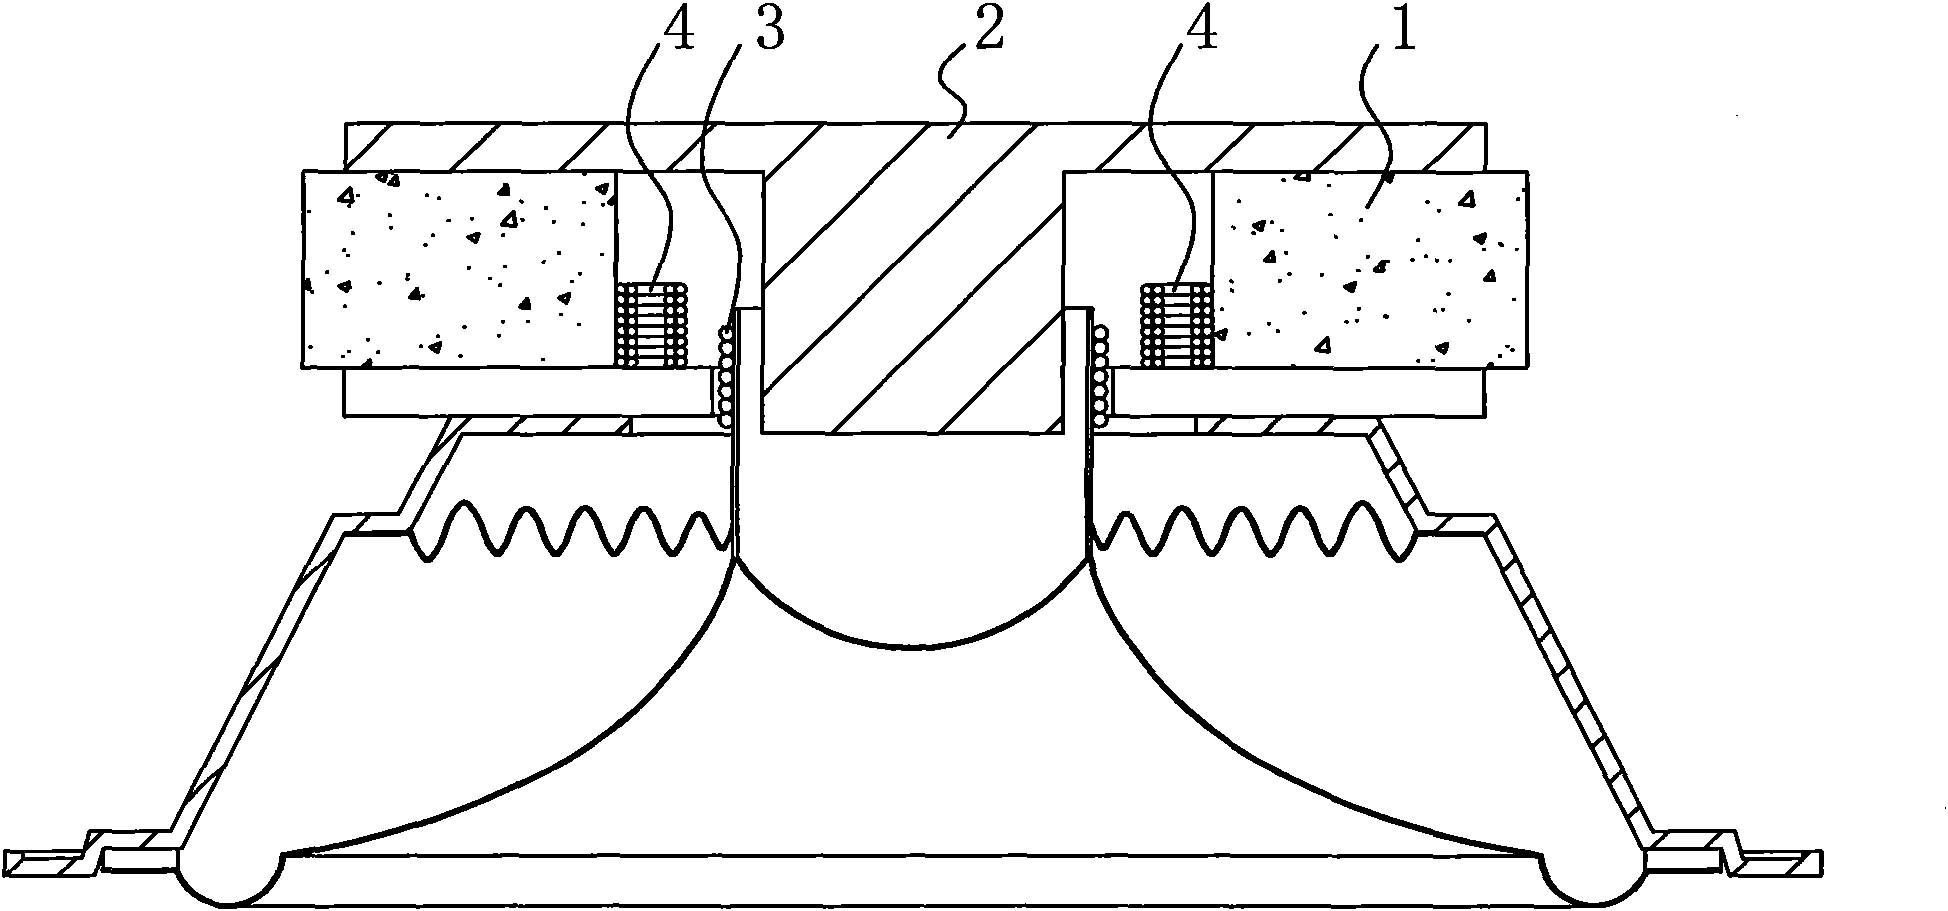 Loudspeaker with optimized audio frequency